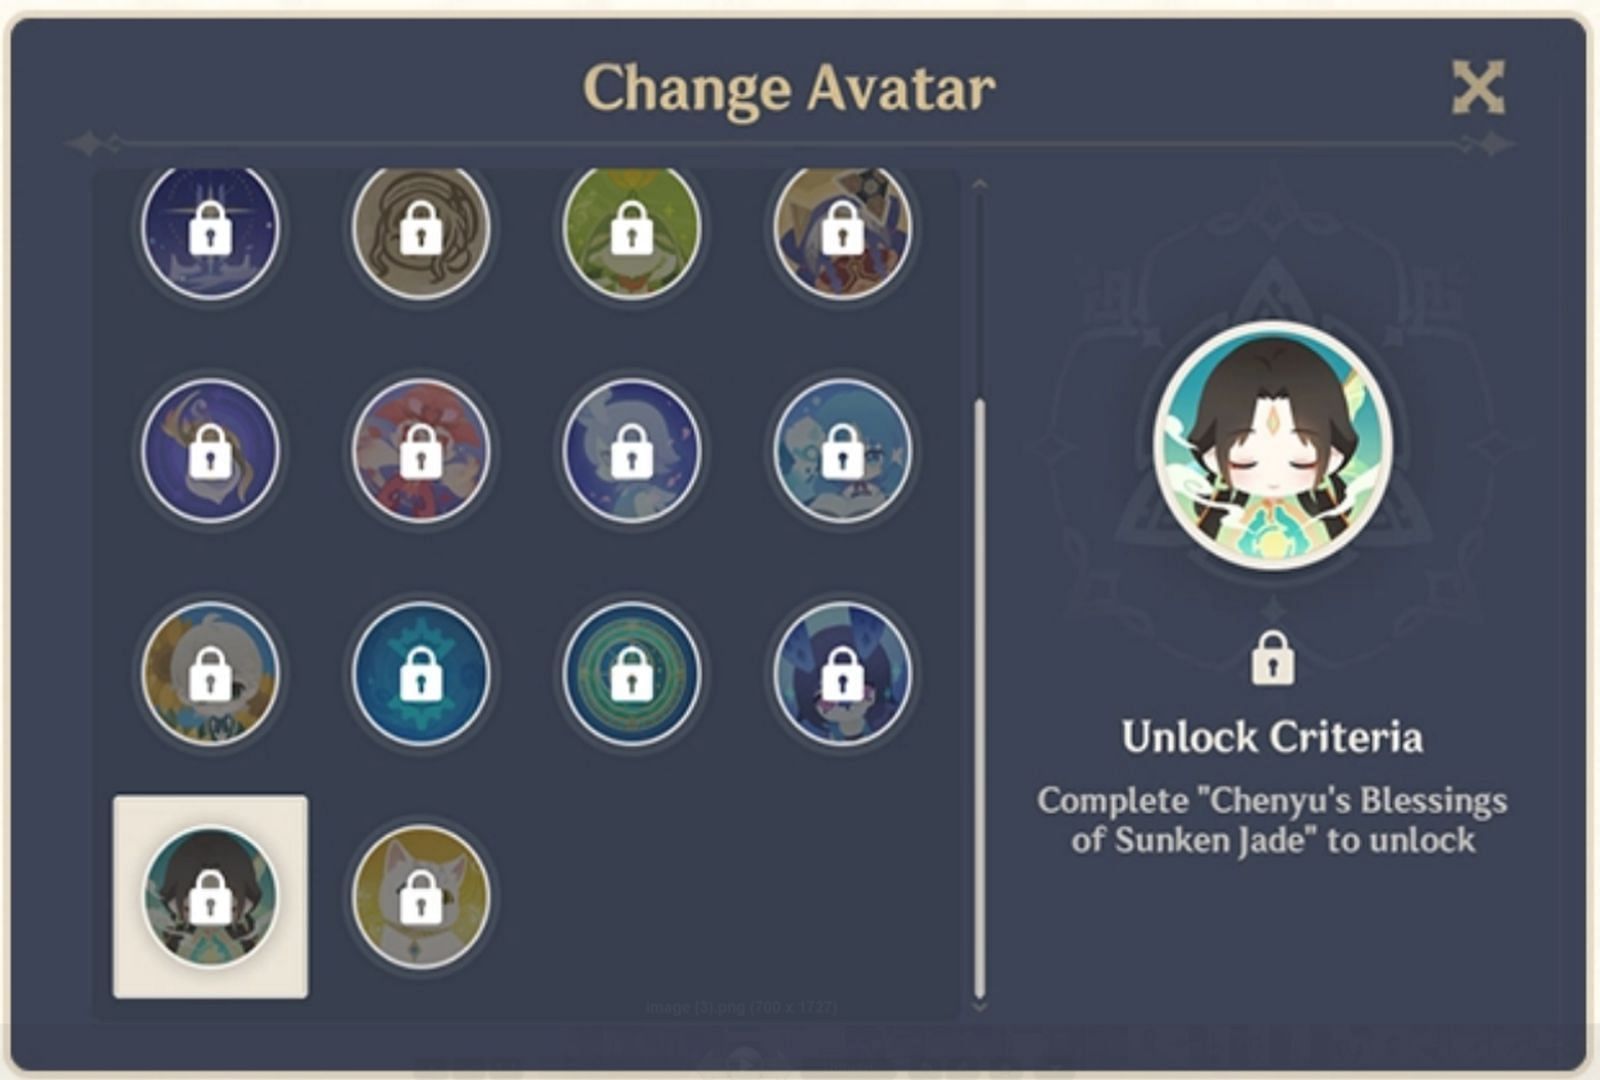 Players can use new avatar icons as profile pictures. (Image via HoYoverse)